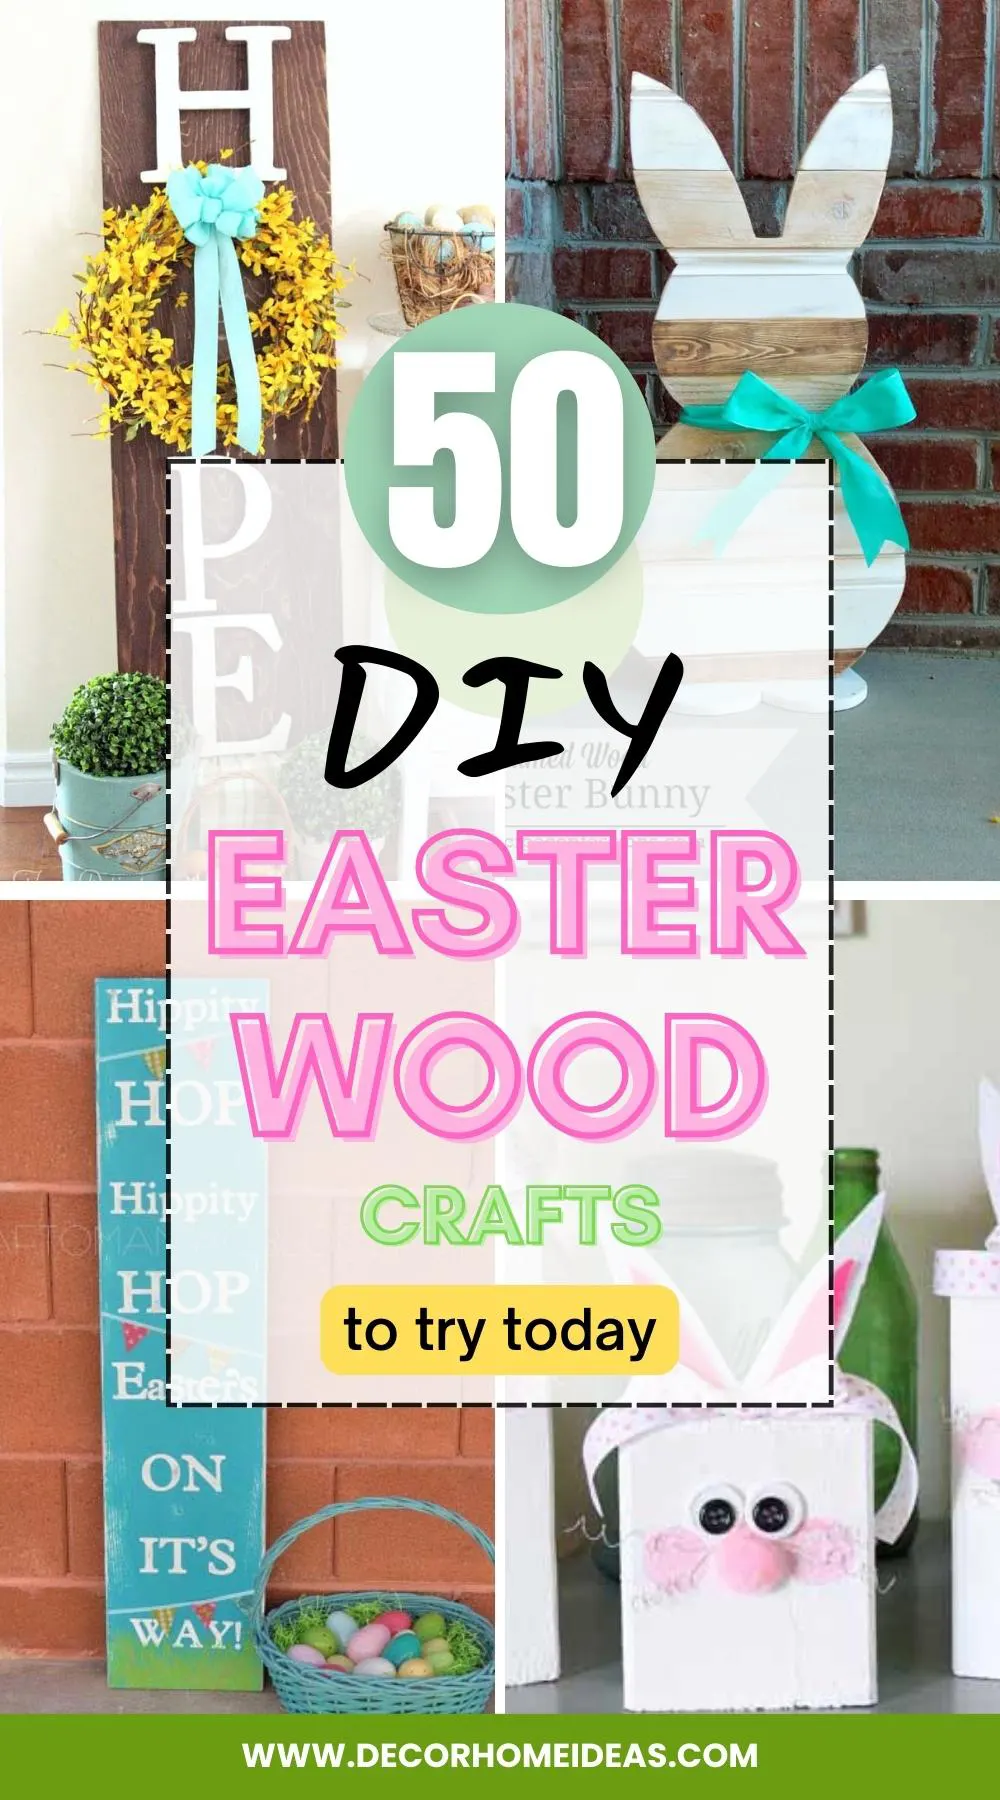 DIY Easter wood crafts provide a unique and personalized way to decorate your home and celebrate the holiday season. From wooden signs to bunny-shaped planters, these crafts offer a rustic and charming touch that adds warmth and character to your space, and can be customized to fit your personal style and taste.